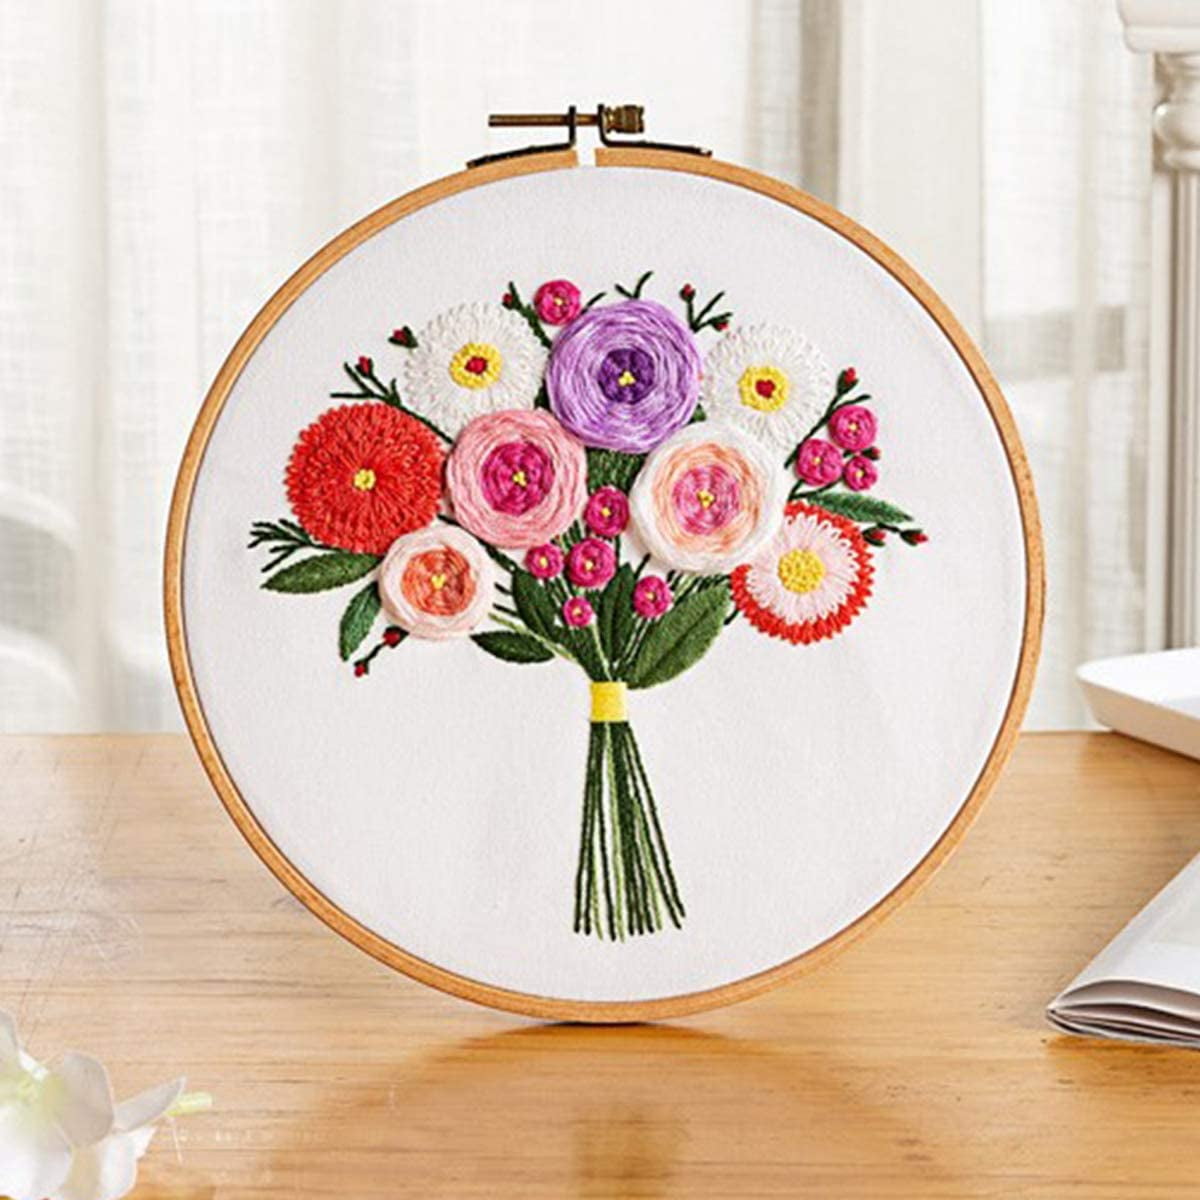 Maydear Stamped Embroidery Kit for Beginners with Pattern, Cross Stitch kit,  Embroidery Starter Kit Including Embroidery Hoop, Color Threads and  Embroidery Scissors - Butterflies Love Flowers 